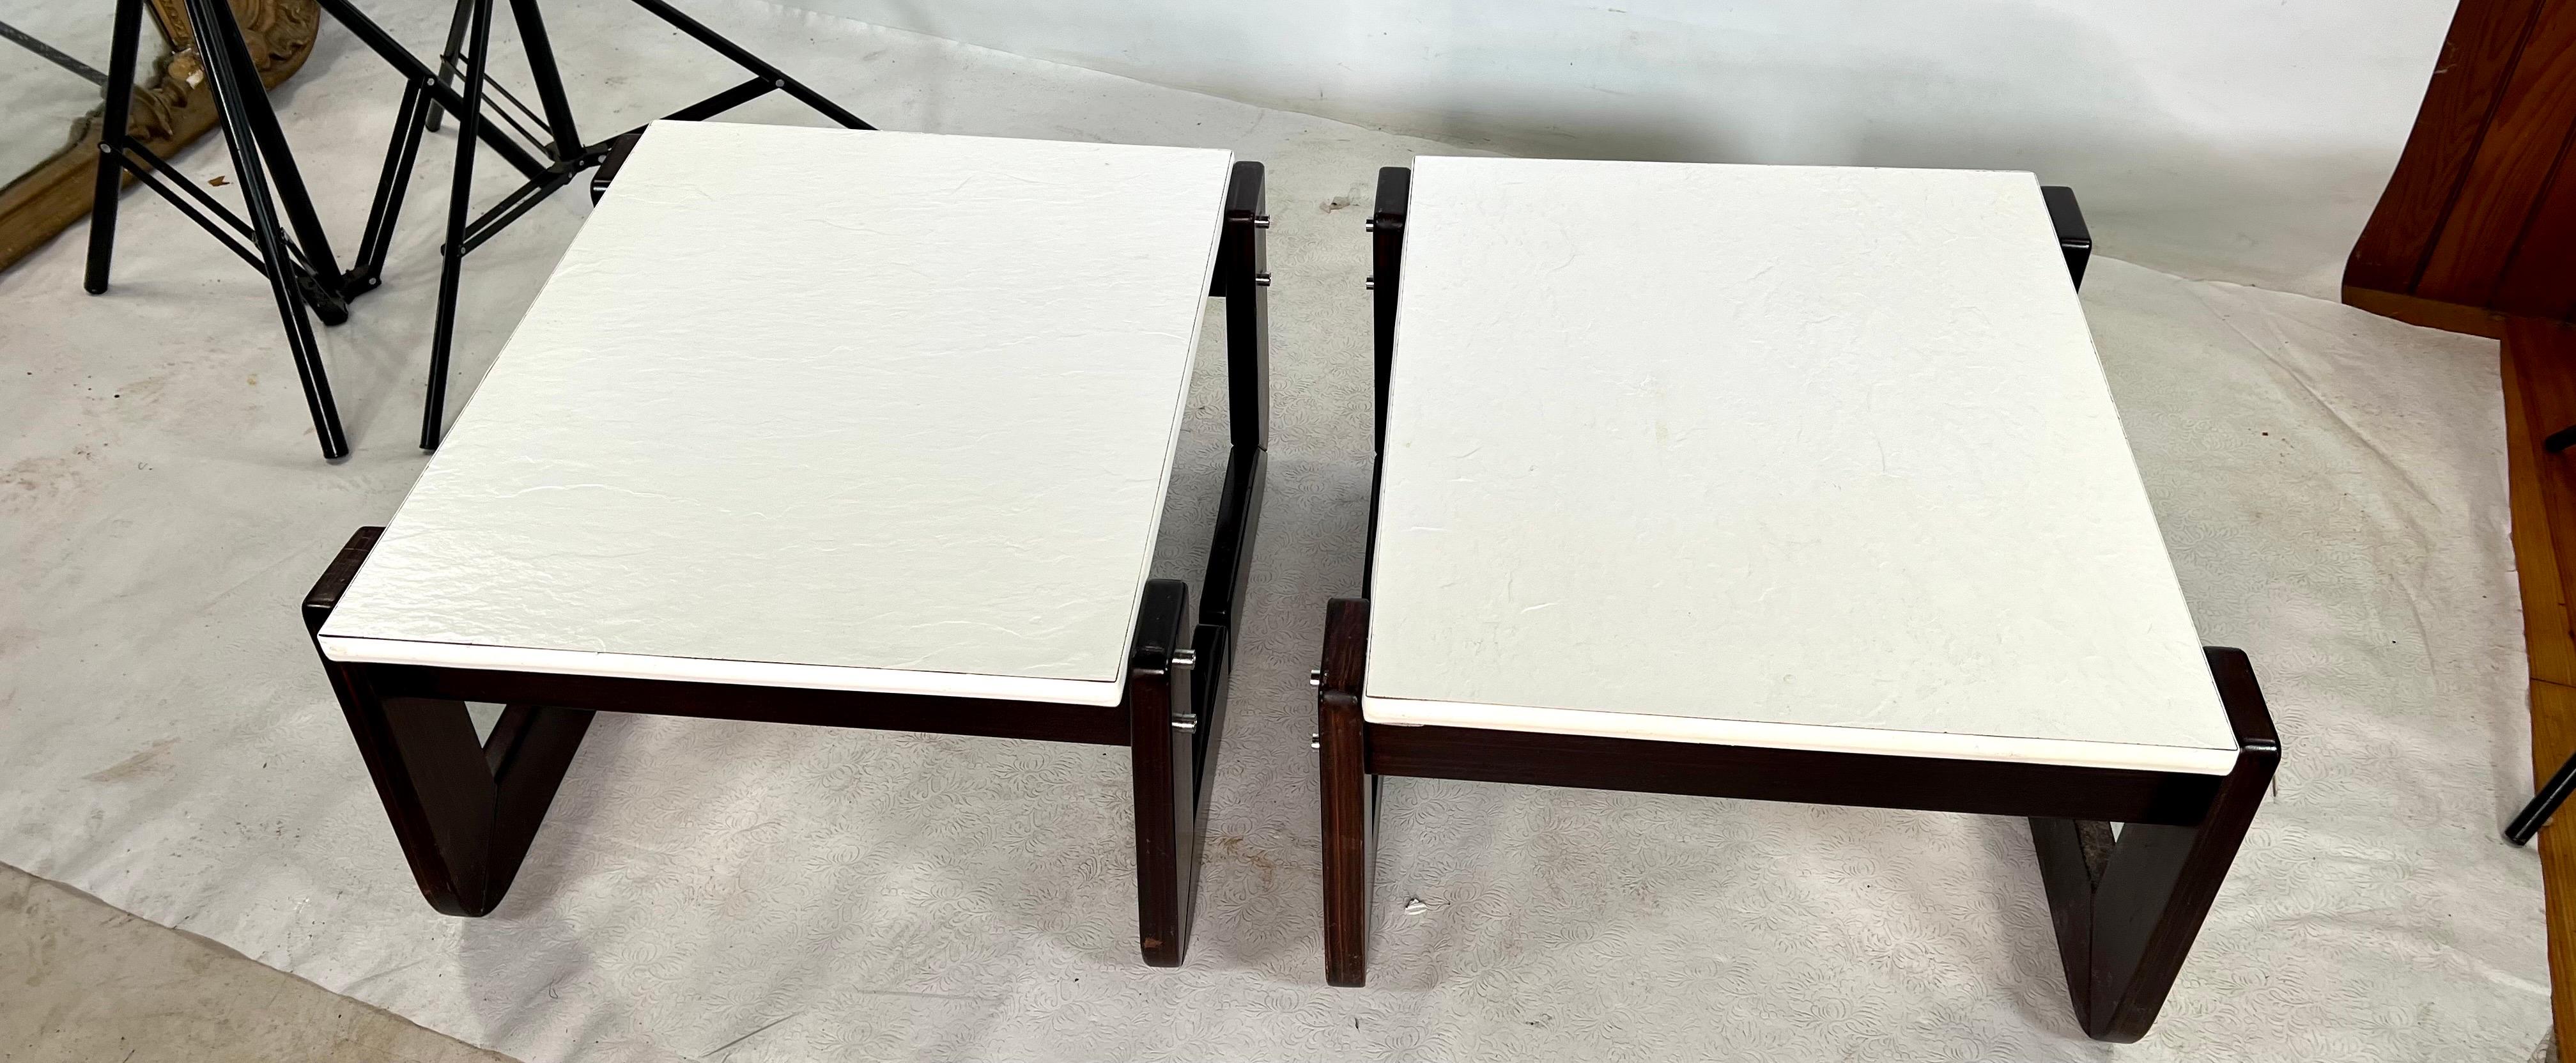 For sale is this vintage set of side tables made by Percival Lafer. One of the tables still has its original tag, also top is a textured laminate.